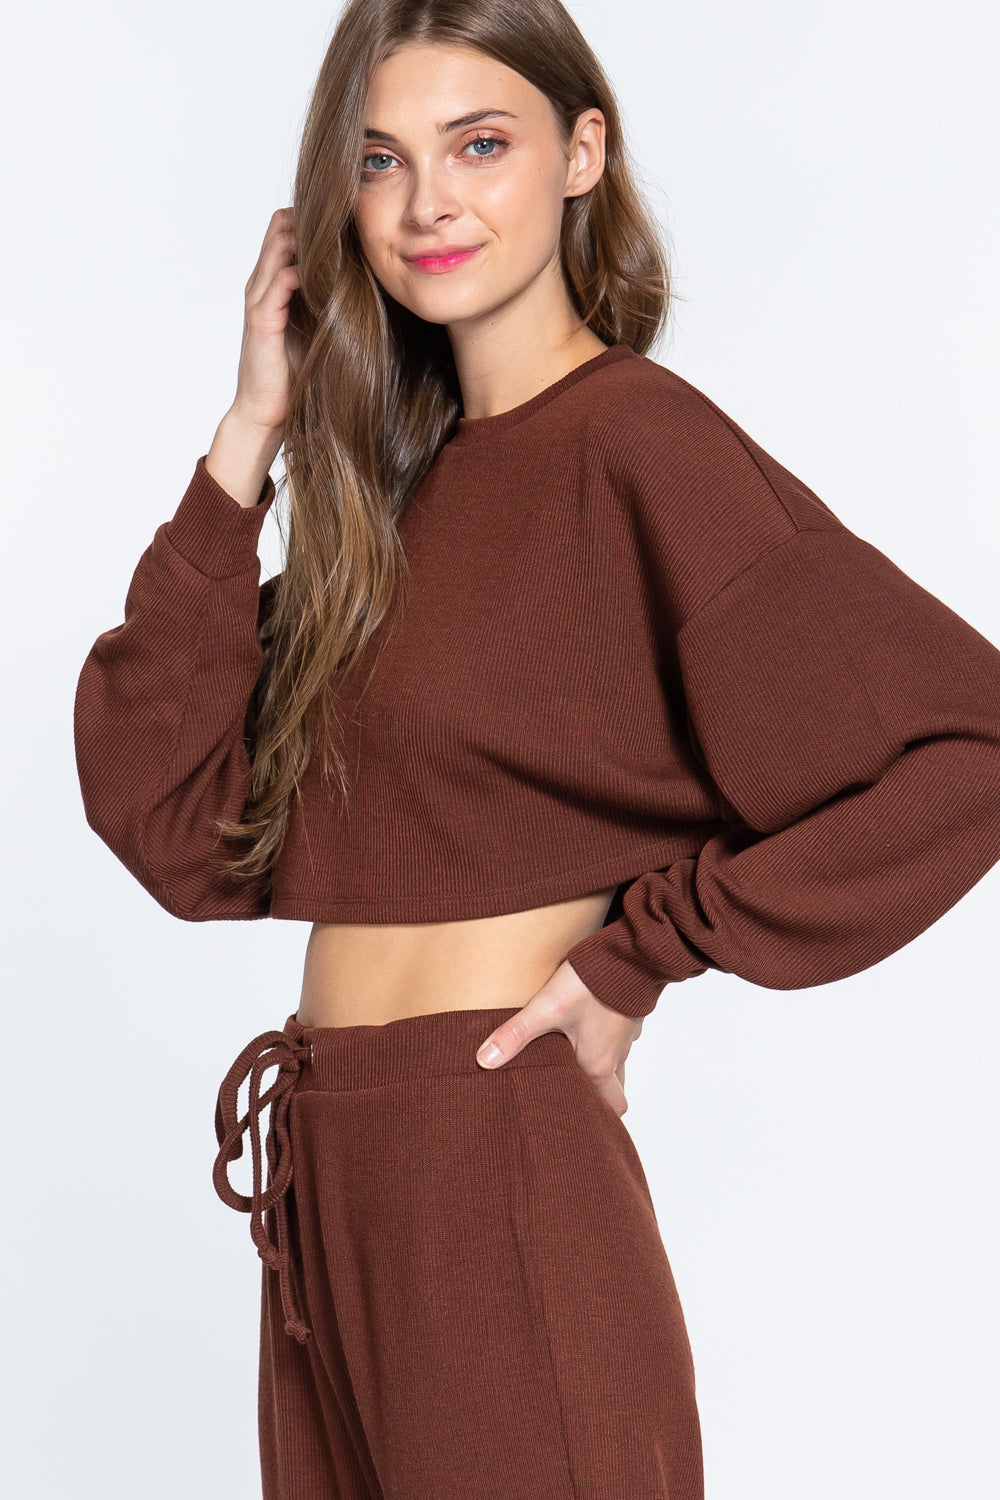 The802Gypsy  shirts and tops Oak Brown / S ❤GYPSY LOVE-Hacci Crop Top